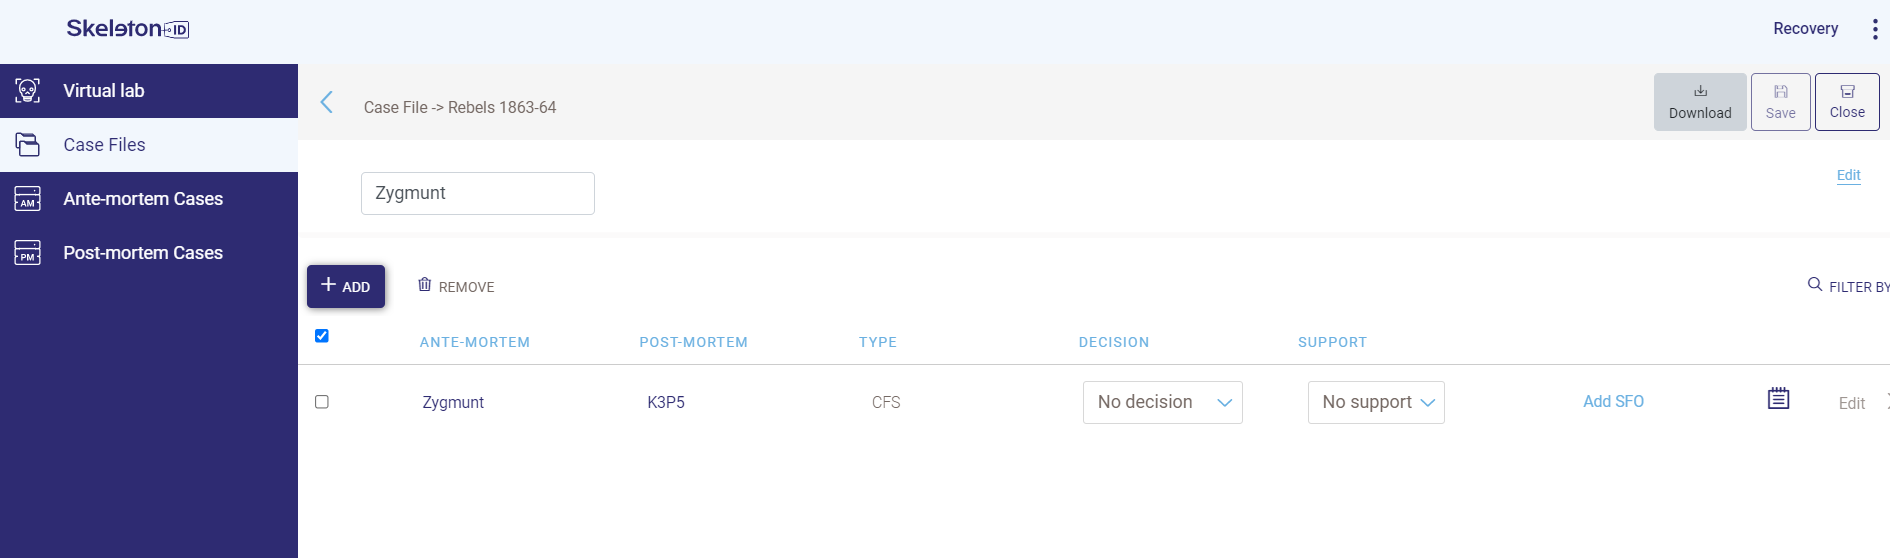 Default screen for decision making and reporting